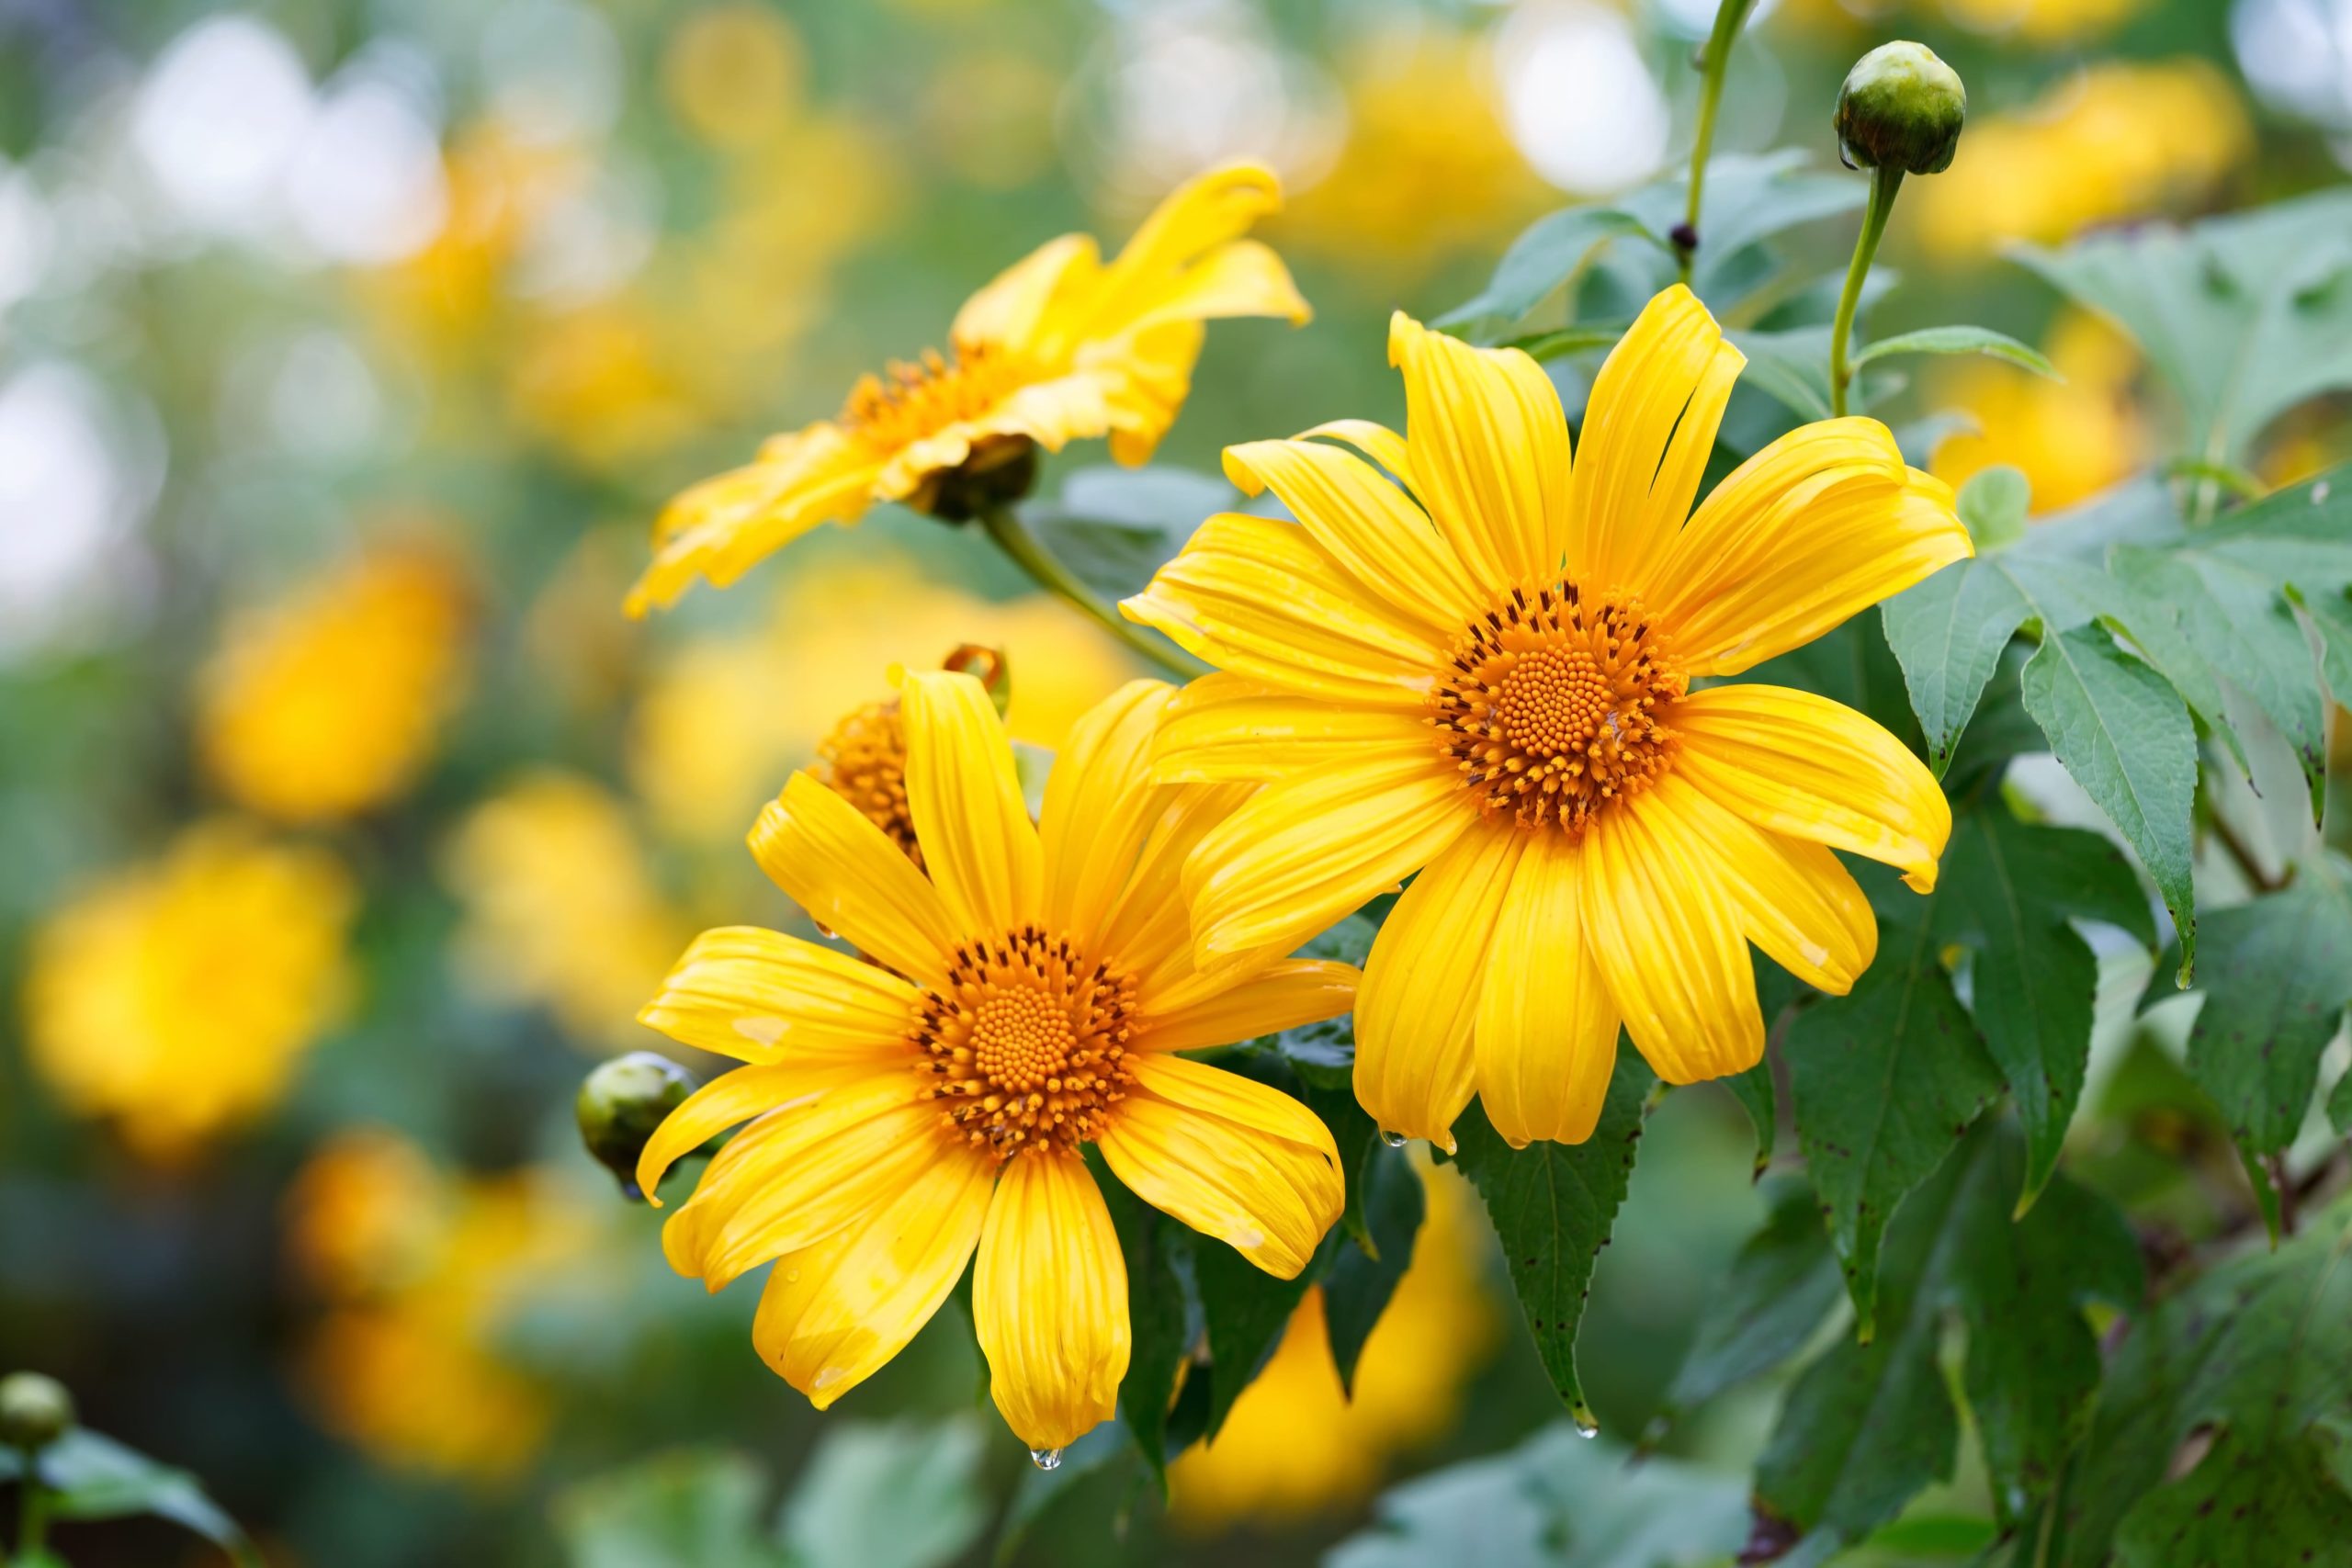 Mexican sunflowers